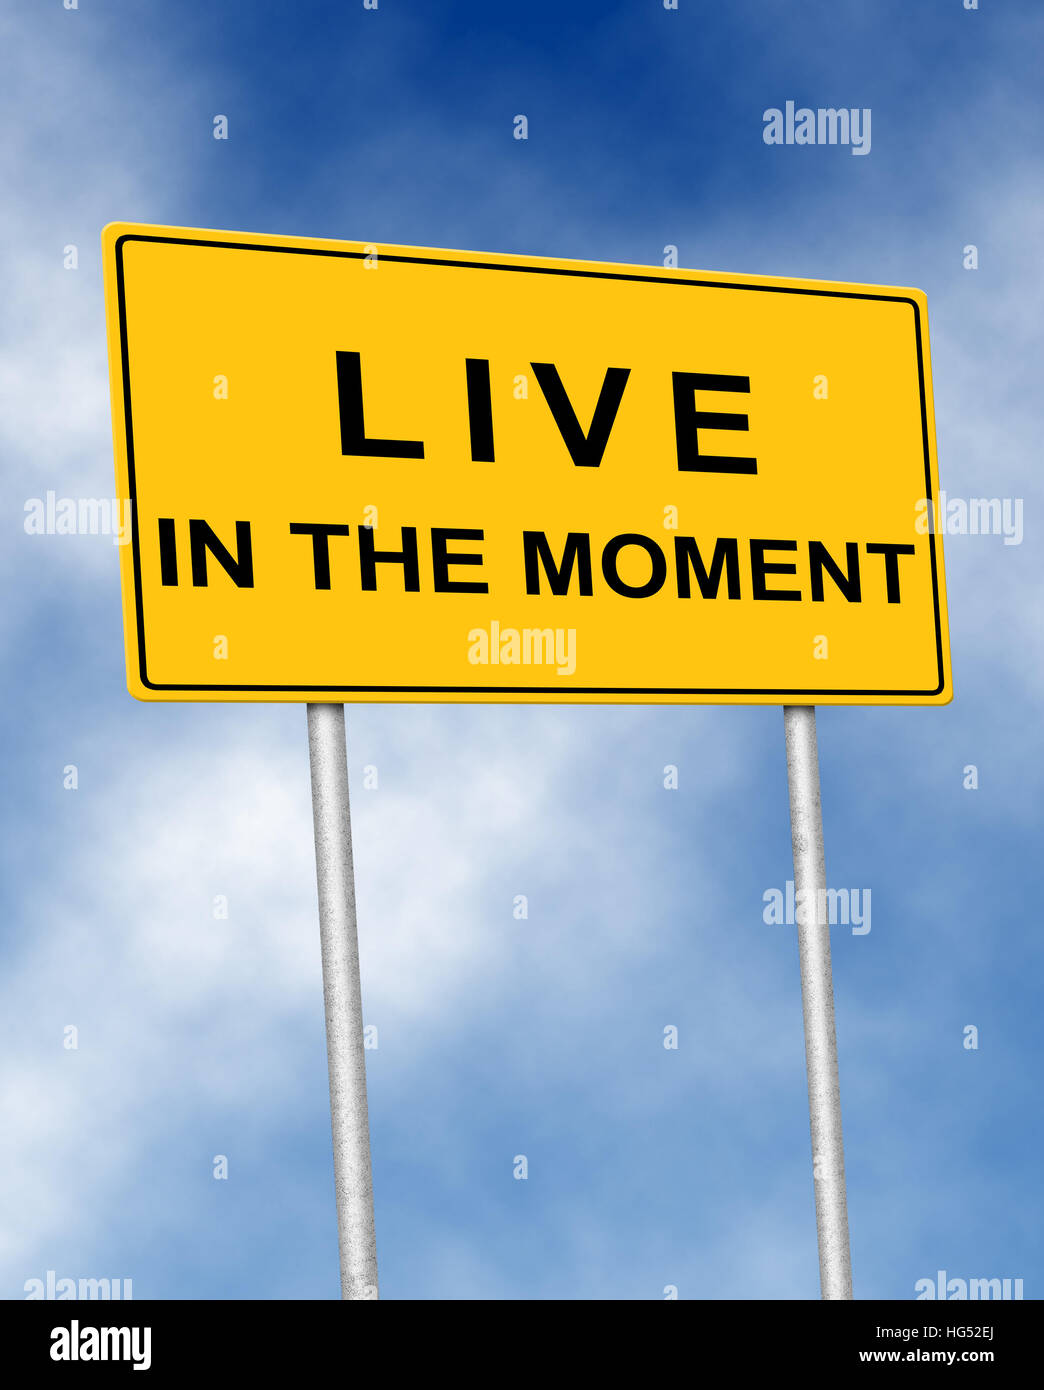 The road sign symbol with text Live in the moment Stock Photo